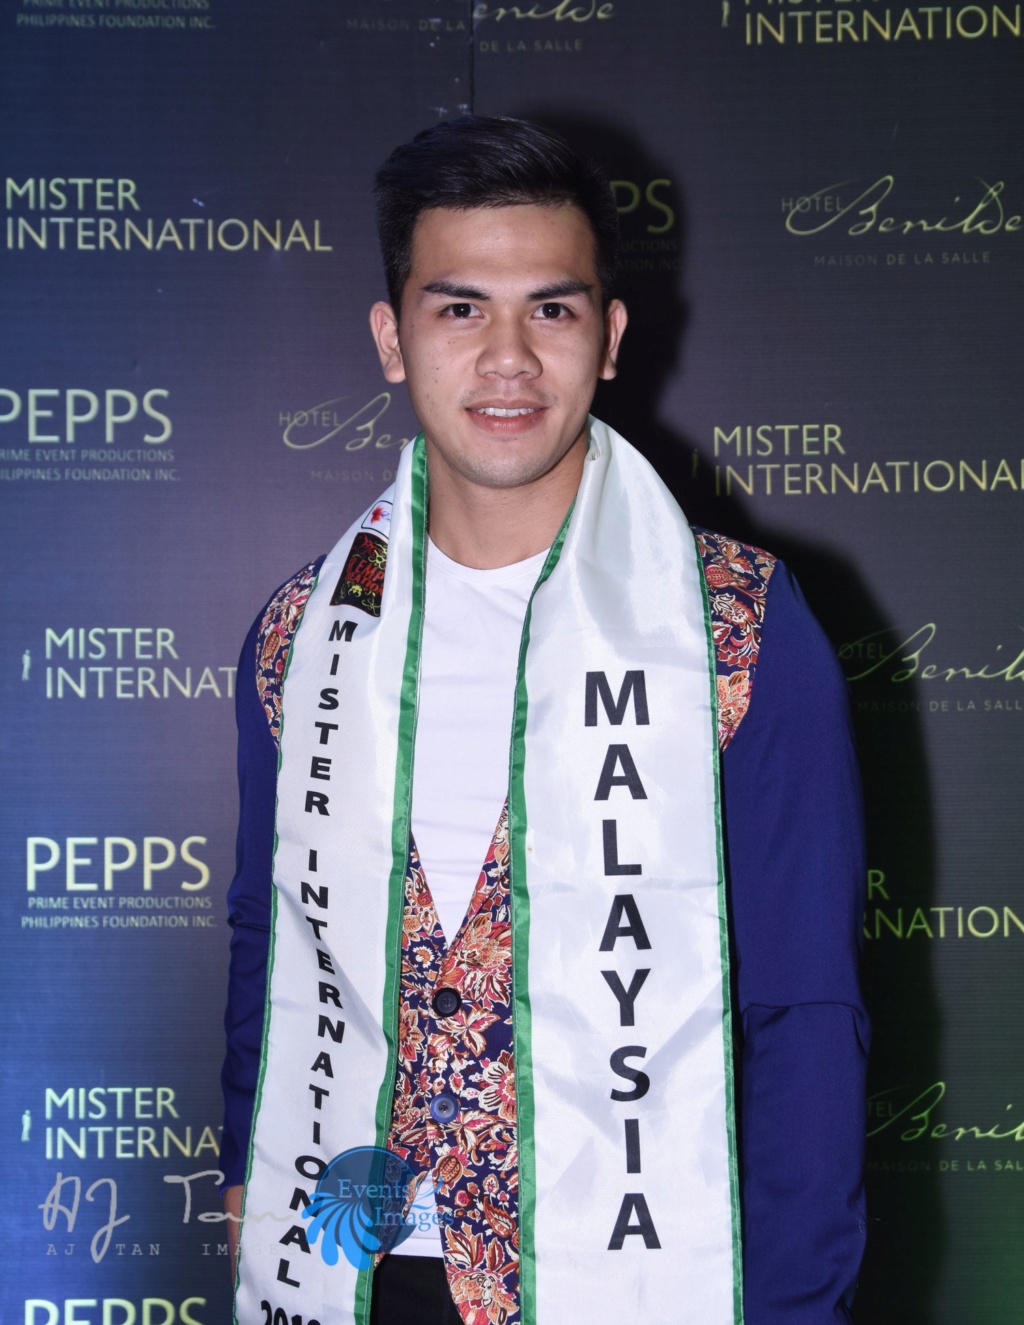 The 13th Mister International in Manila, Philippines on February 24,2019 - Page 7 51964310